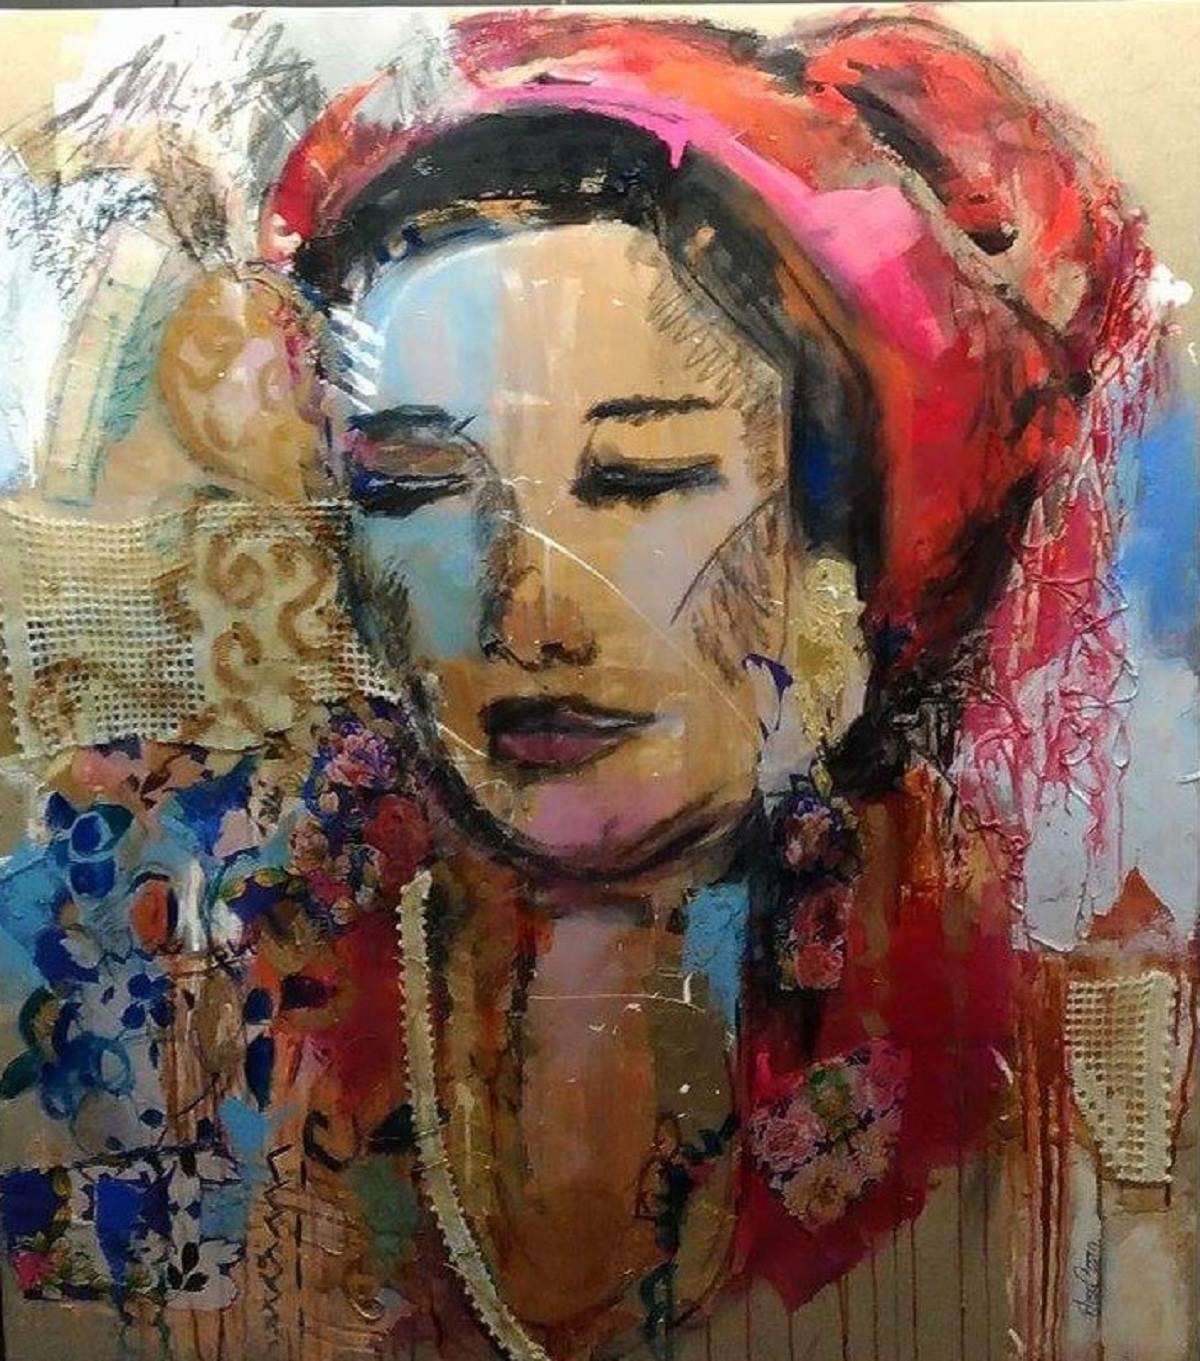 Return to the Essence IV, original Woman Mixed Technique Painting by ELISA DA COSTA